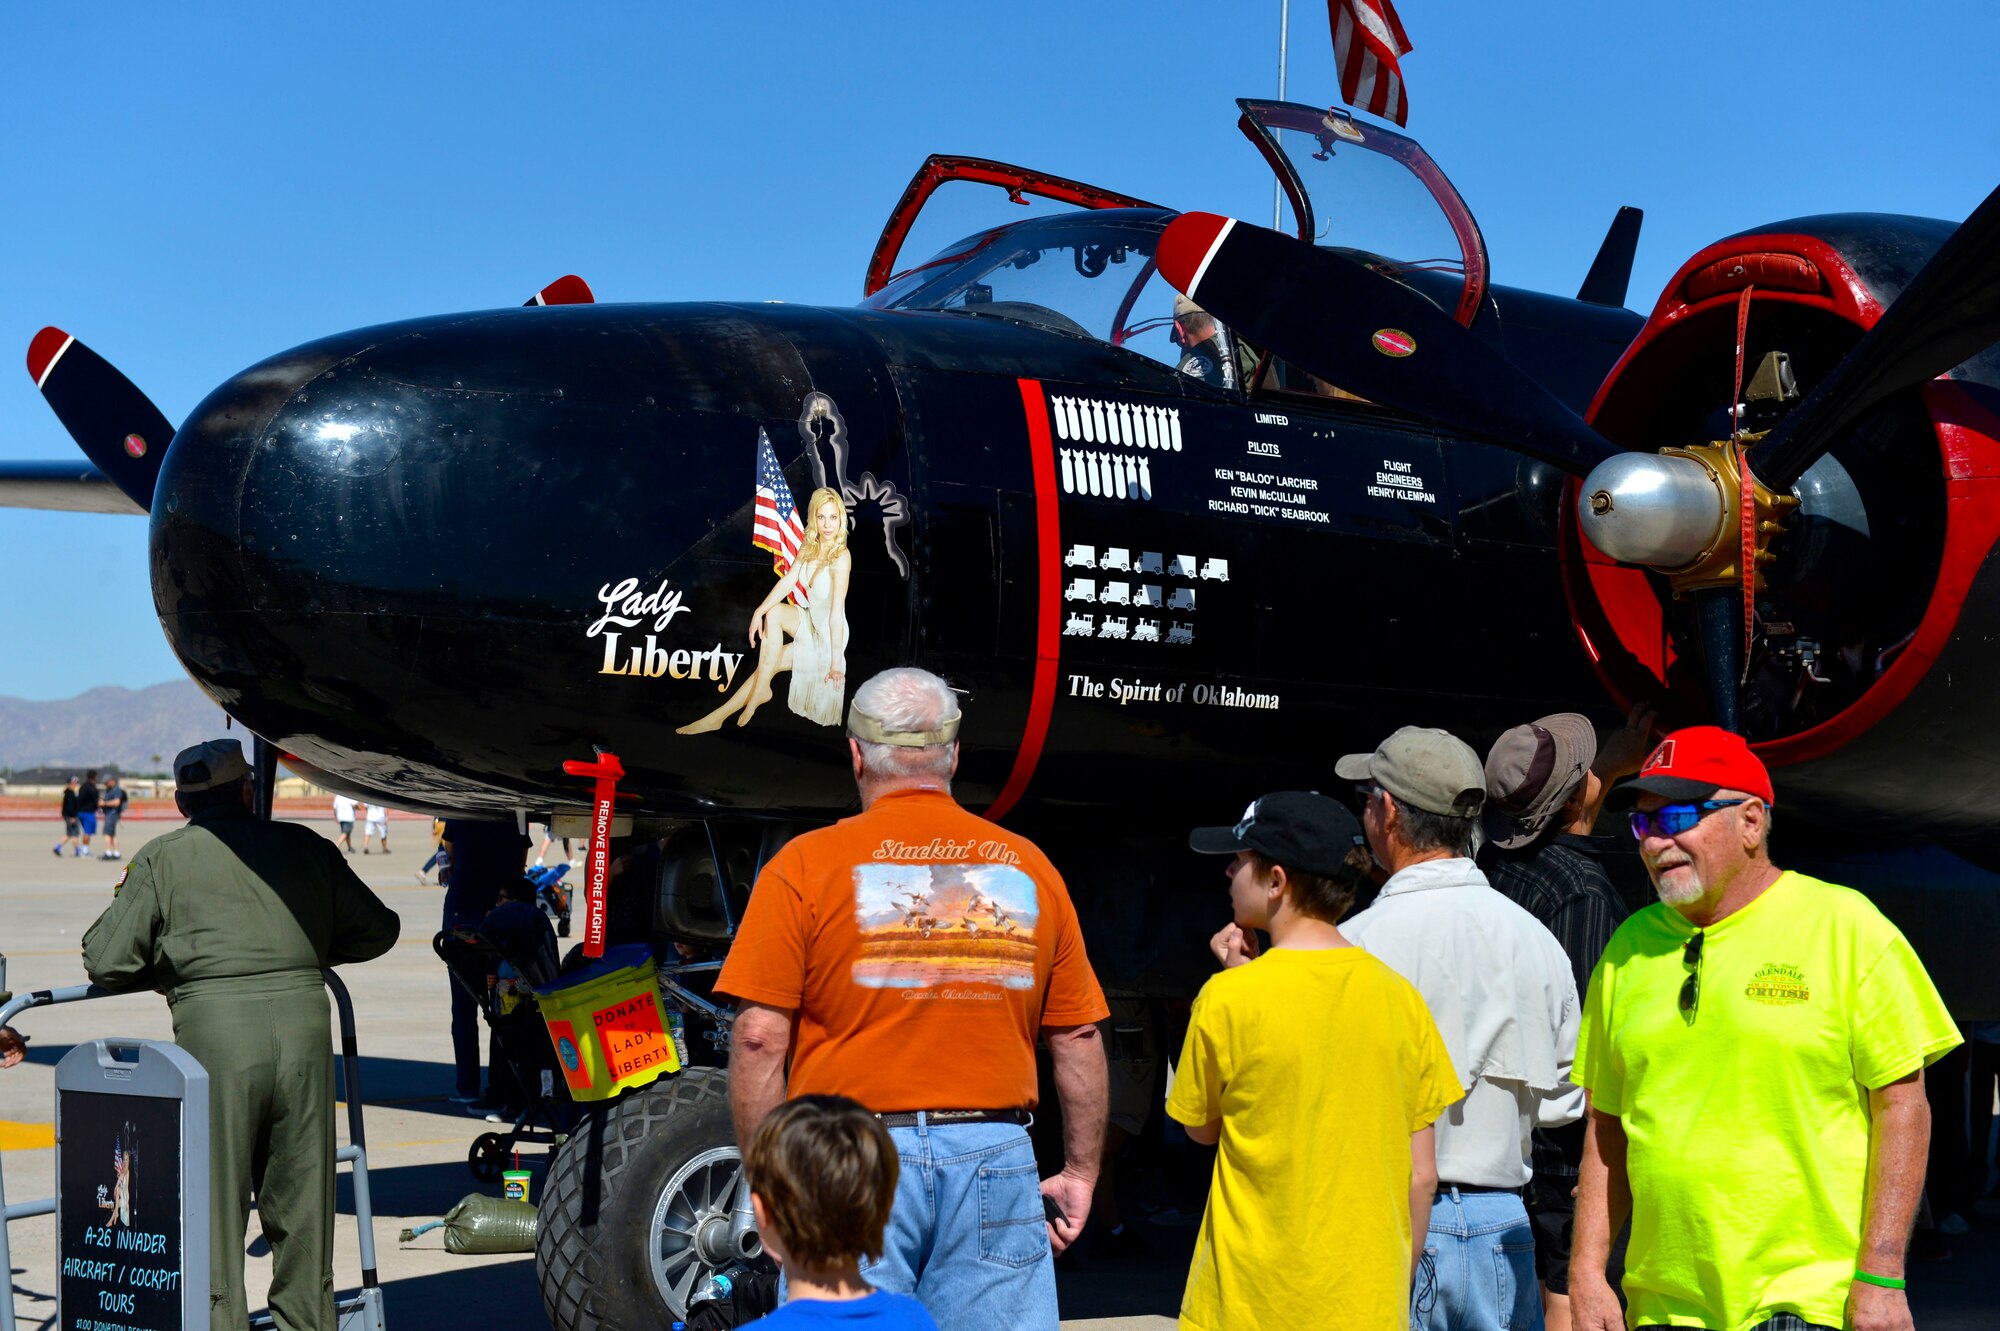 Airshow visitors admire an A-26 Invader at the Luke Air Force Base air show, 75 Years of Airpower Apr. 2, 2016.  The Invader is a twin-engine light bomber aircraft built during World War II.  (U.S. Air Force photo by Senior Airman James Hensley)